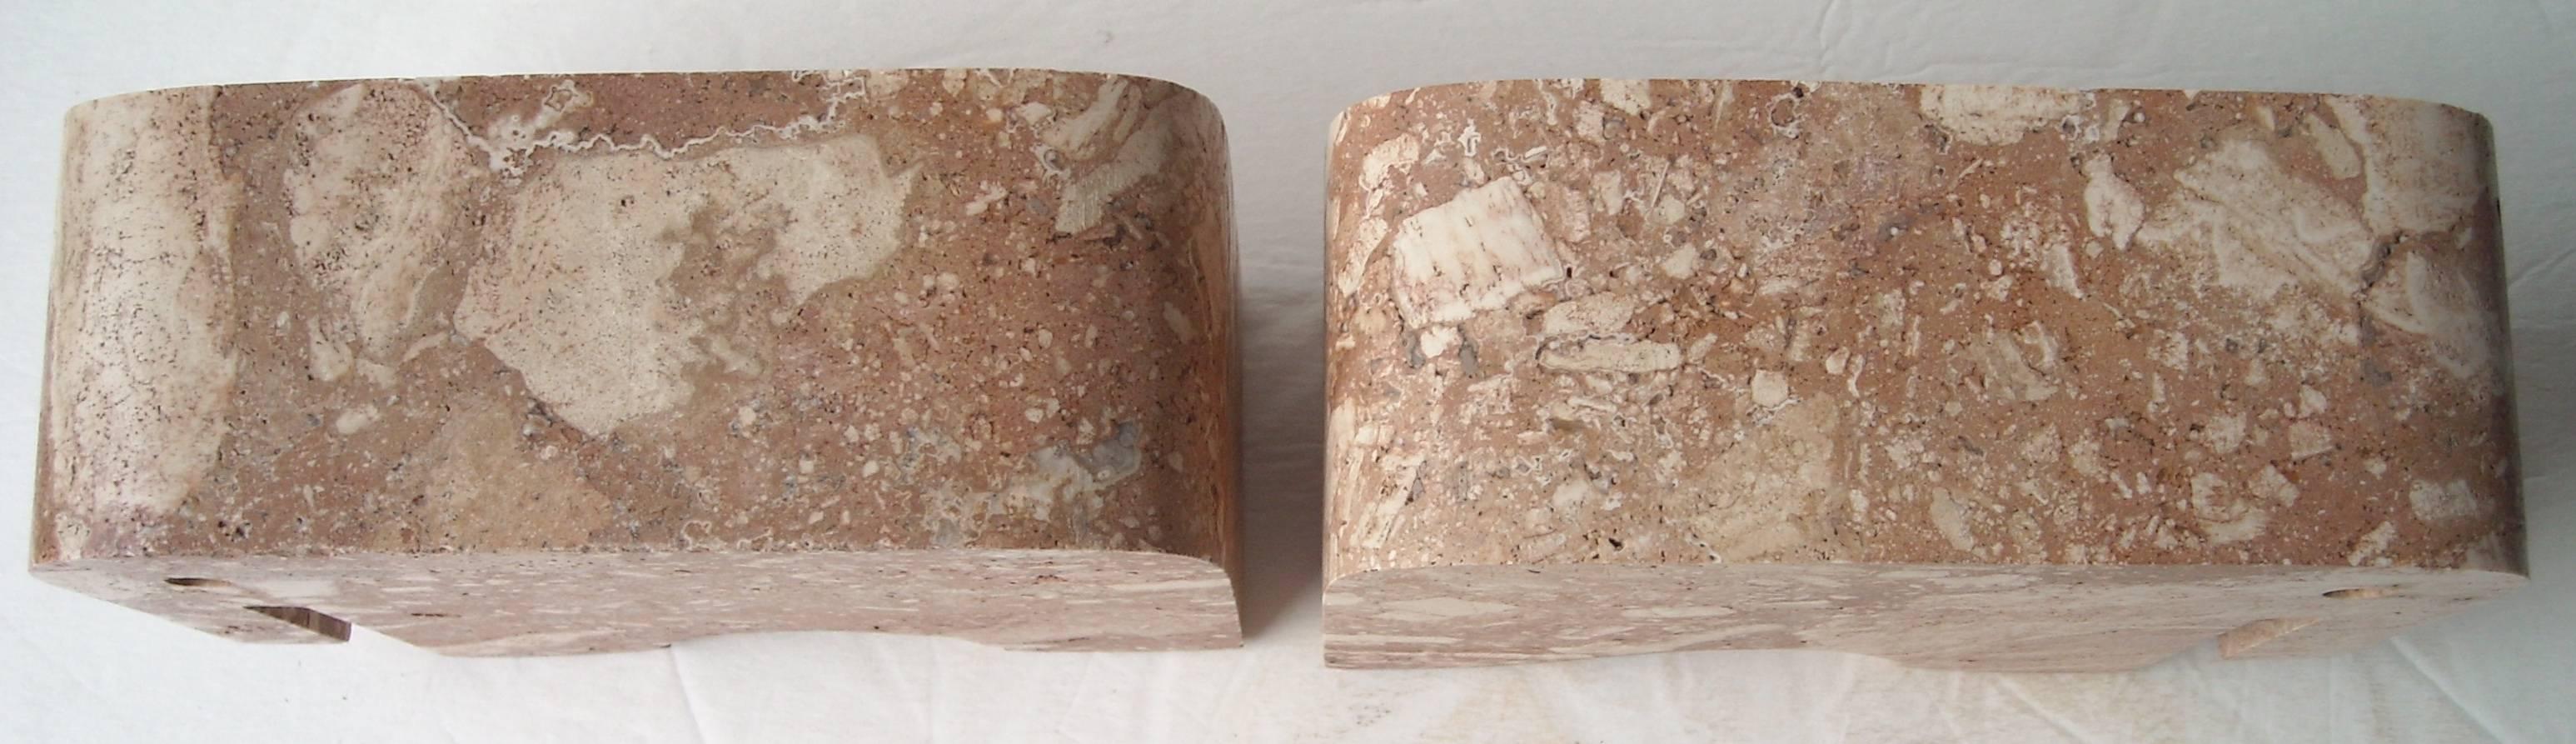 Italian Travertine Elephant Bookends by Flli Mannelli for Raymor, Label